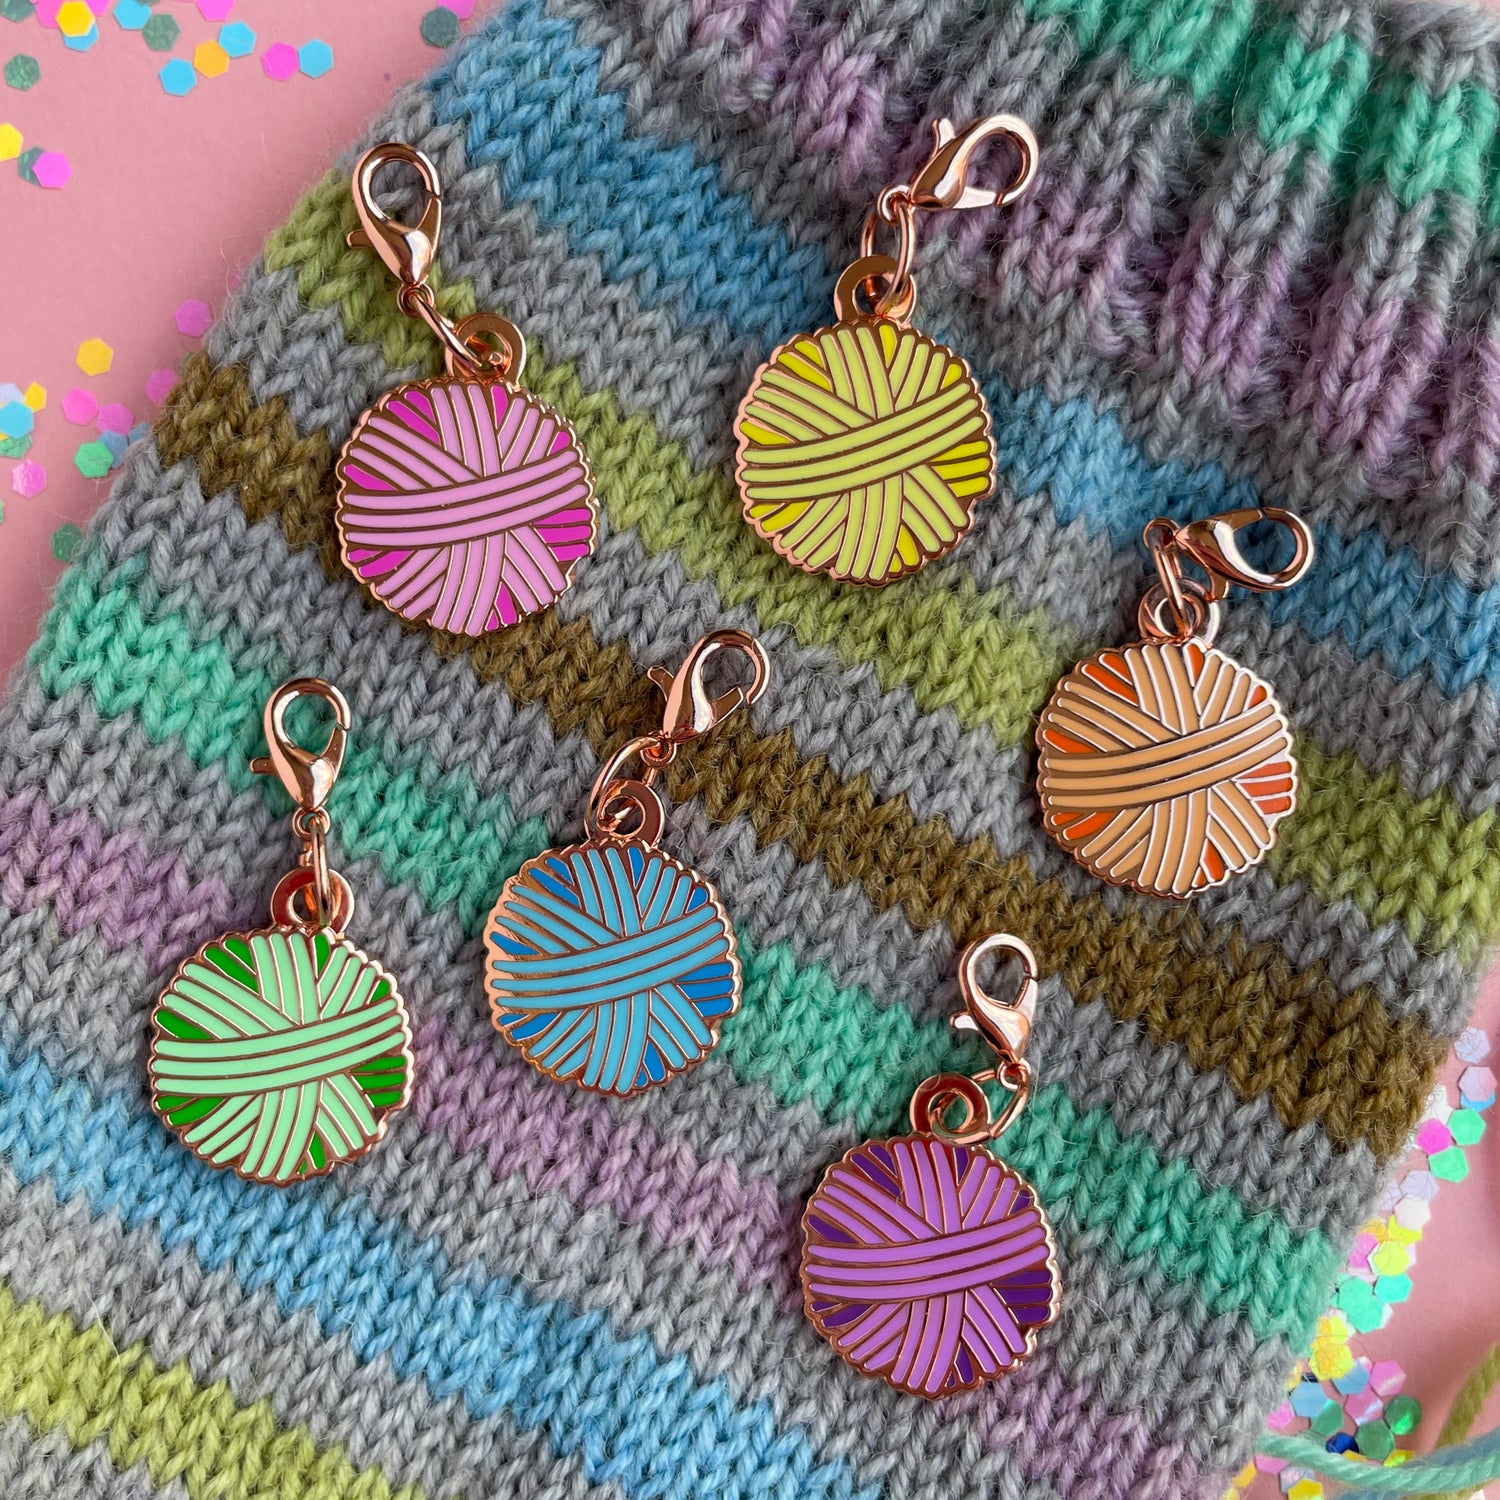 Six lobster claw clasp charms shaped like yarn balls in pink, orange, yellow, mint, blue, and purple on a grey and pastel rainbow striped hand knit sock. 